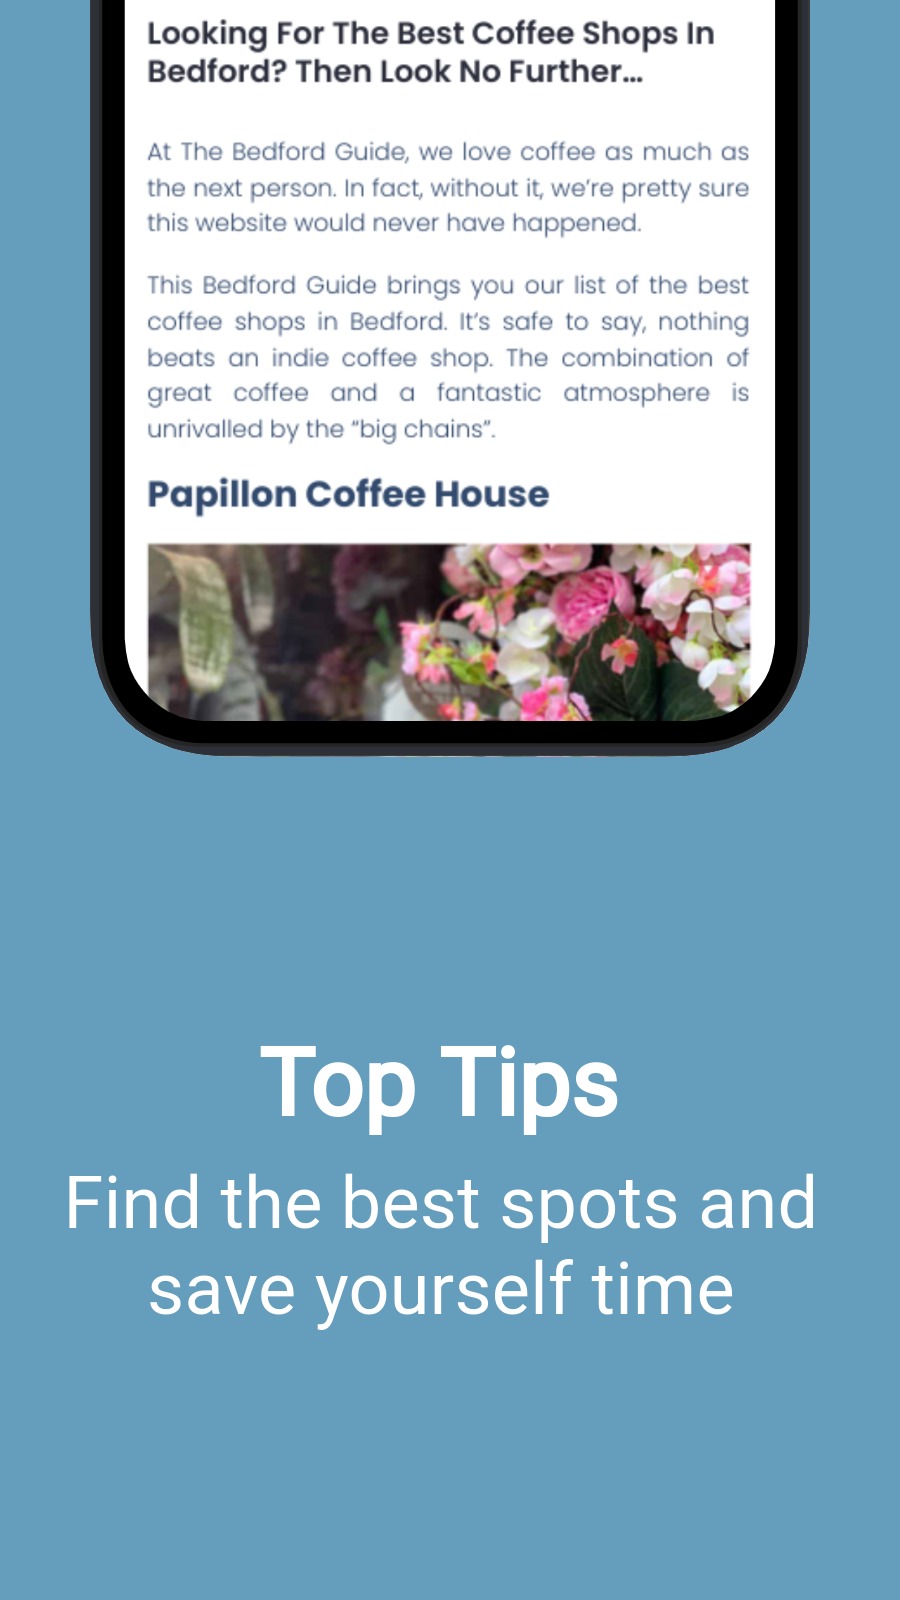 Top Tips - Find the best spots and save yourself time